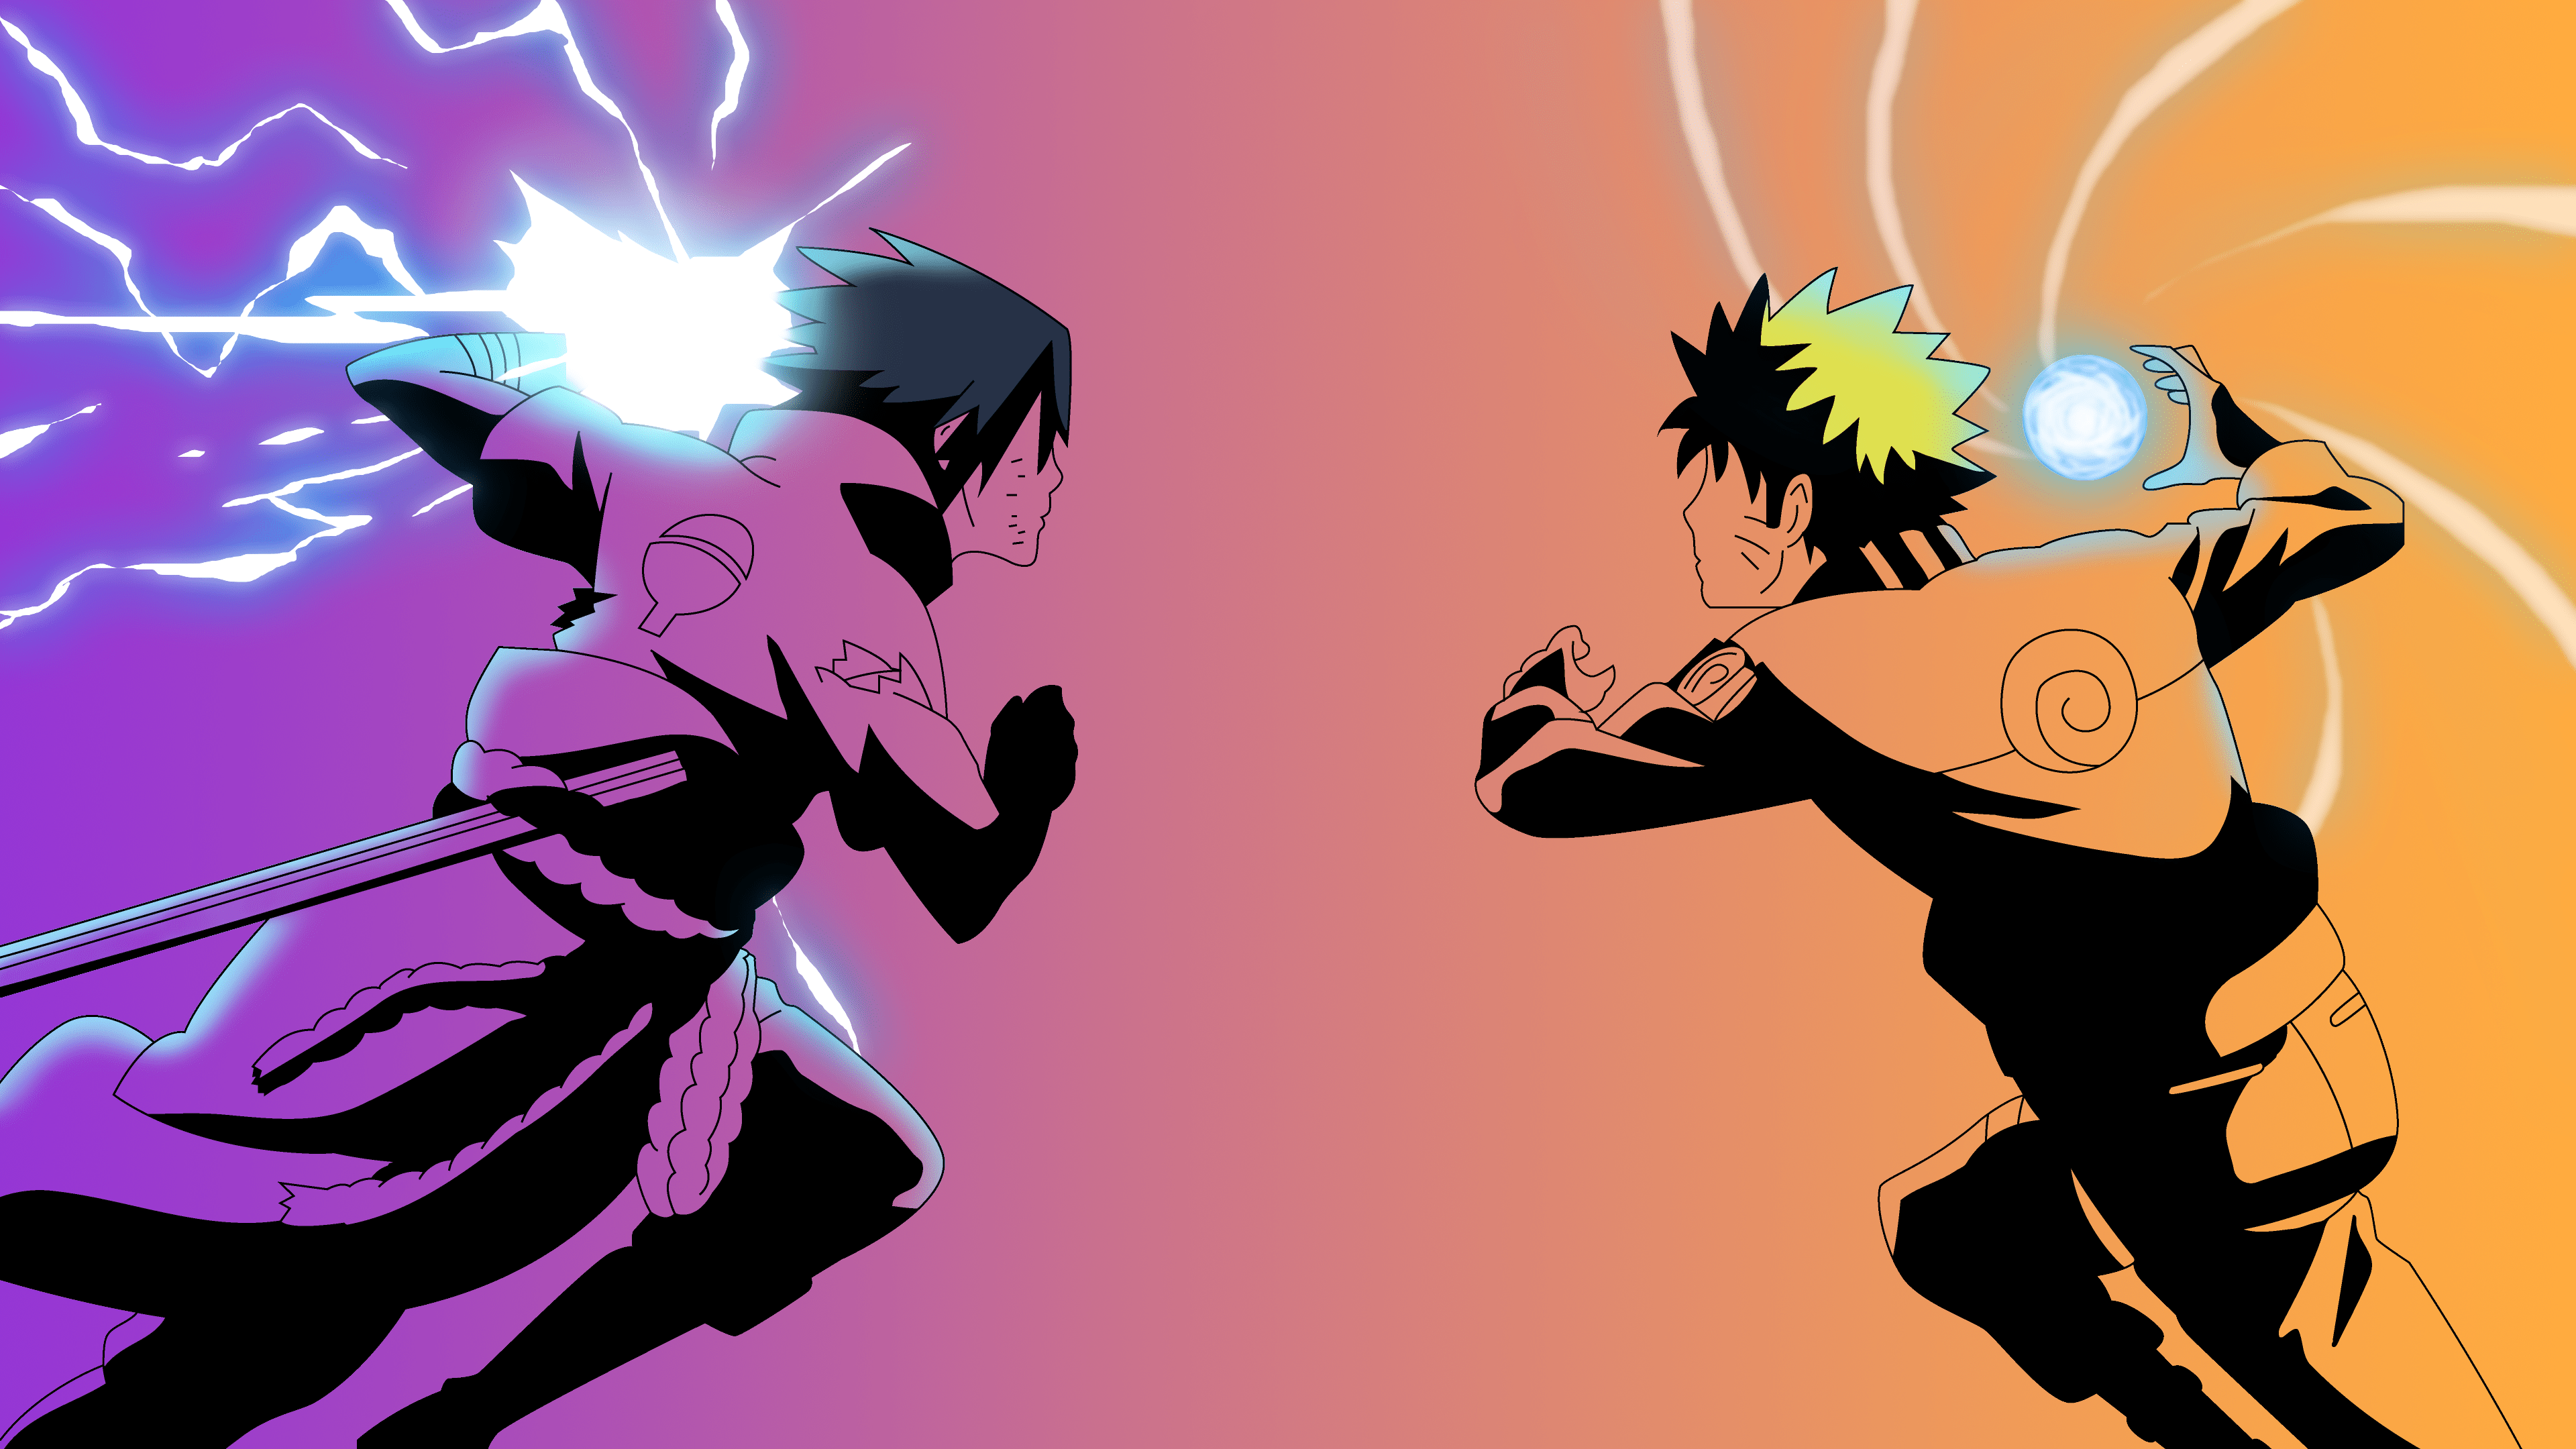 Two anime characters fighting each other in a colorful background - Sasuke Uchiha